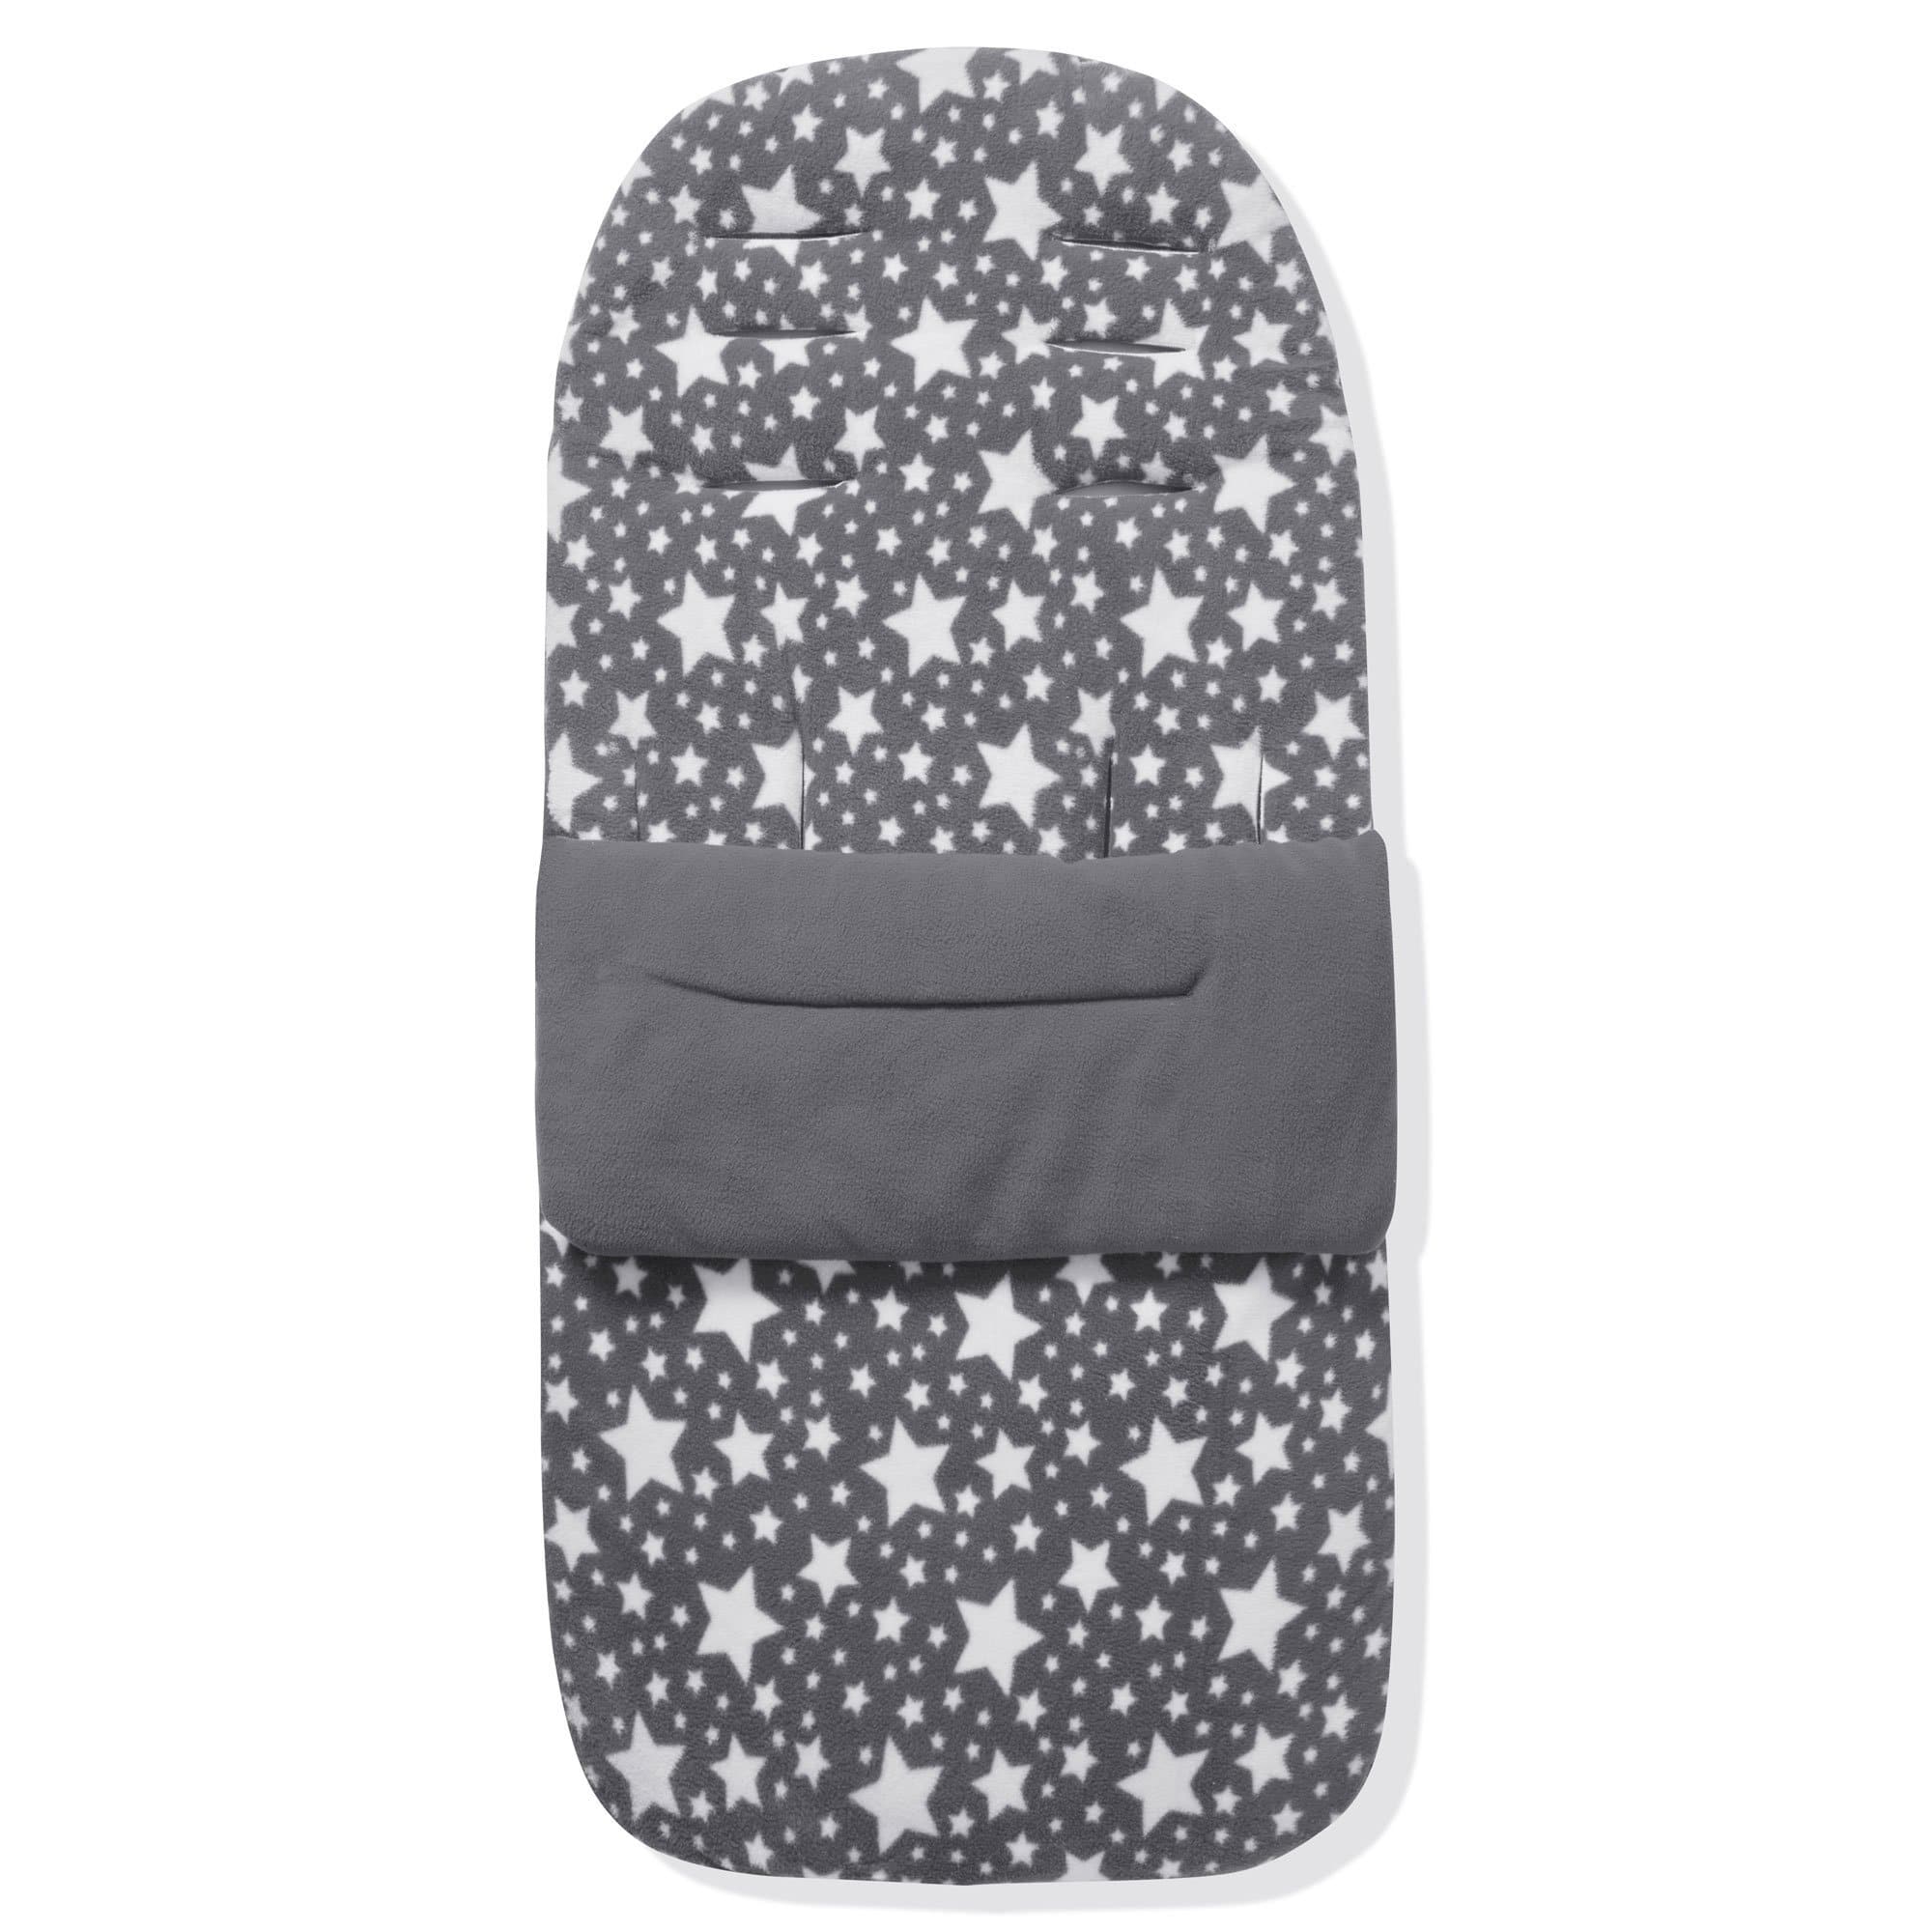 Fleece Footmuff / Cosy Toes Compatible with ABC Design - Grey Star / Fits All Models | For Your Little One